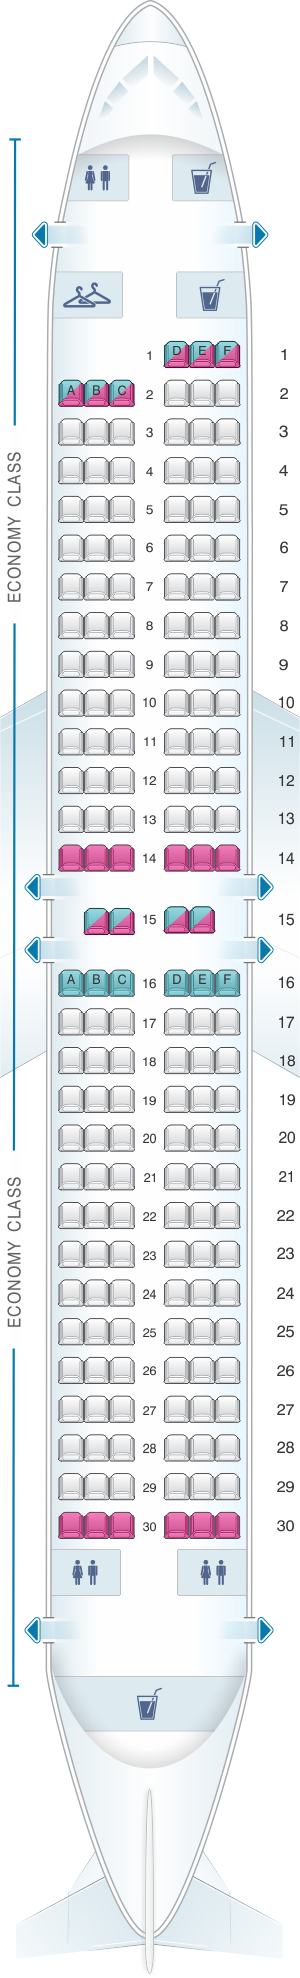 seat assignment southwest